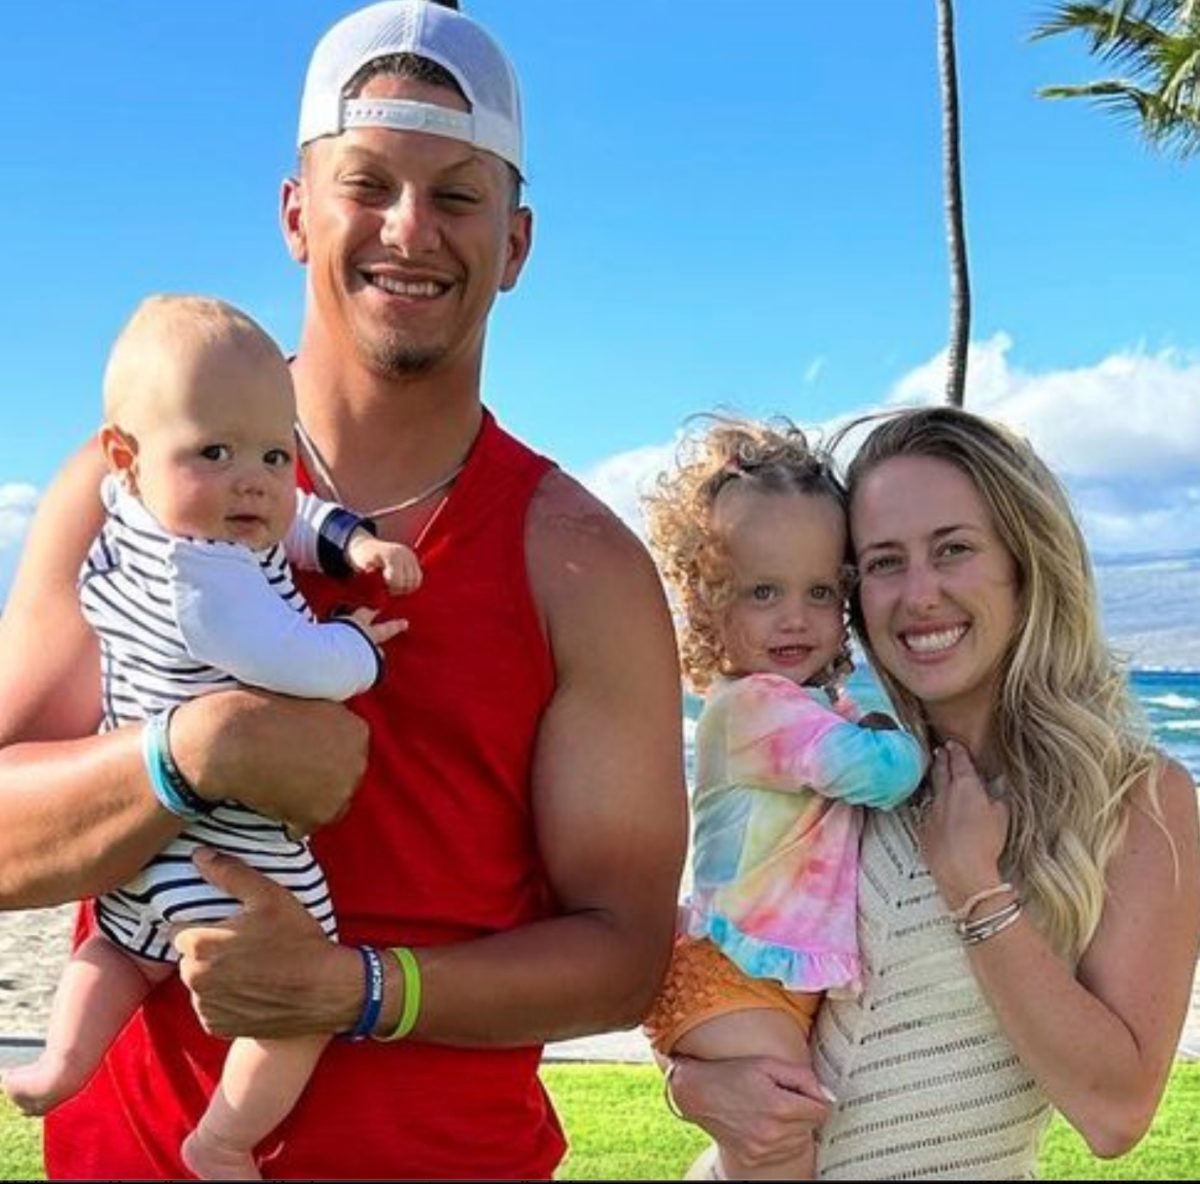 Brittany Mahomes Details the ‘Scary’ and ‘Frantic’ Moment She Learned Her 8-Month-Old Son is Allergic to Peanuts | Brittany Mahomes recently detailed a 'very scary and frantic' trip to the ER after learning her 8-month-old son is 'highly highly allergic to peanuts.'